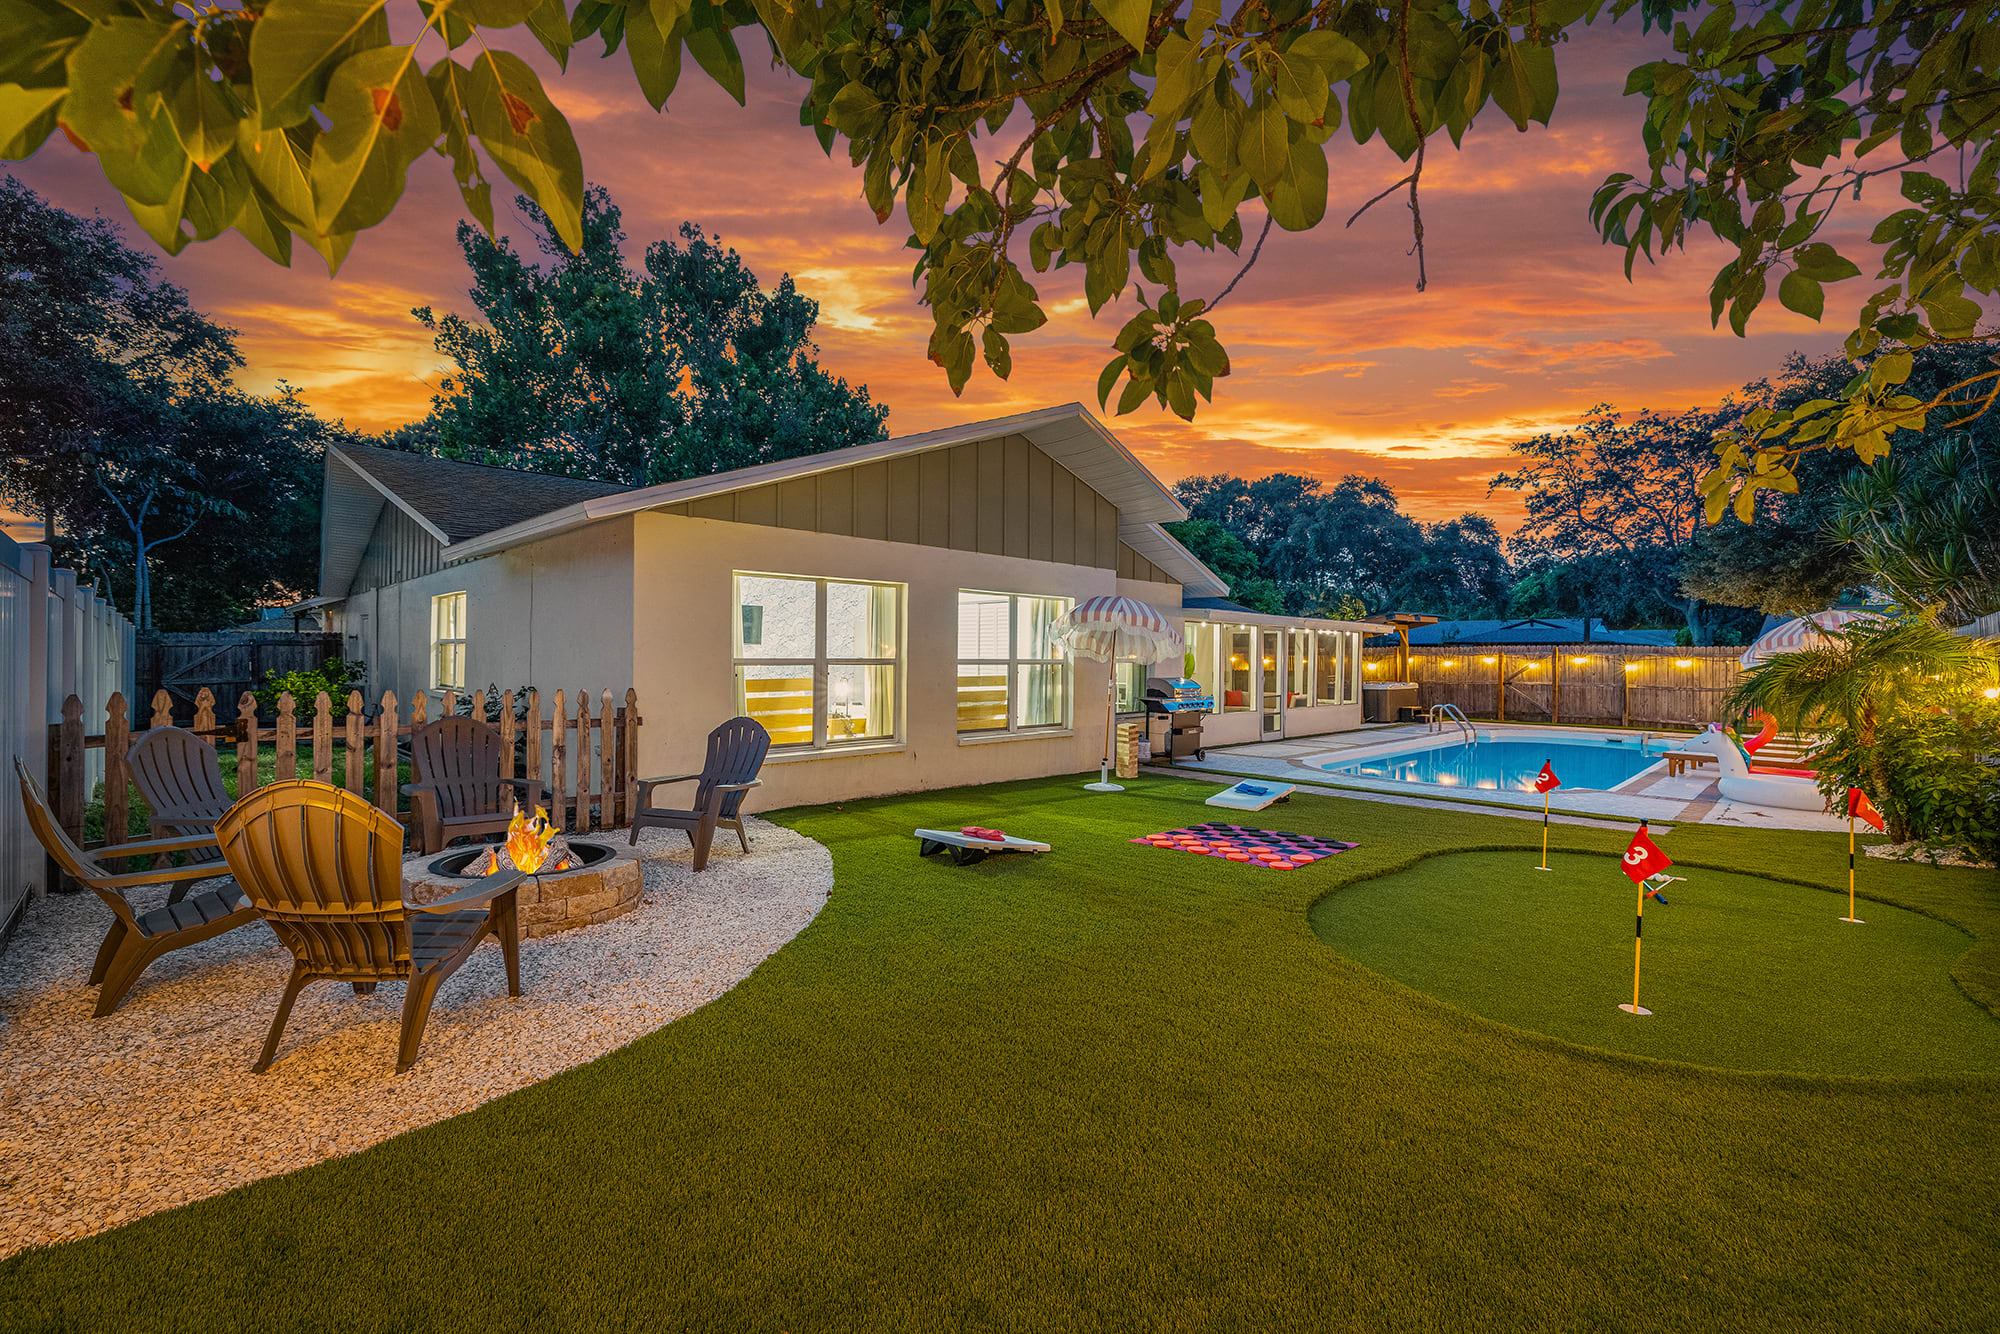 Your paradise backyard- fully stocked with a ton of amenities- professionally installed putt putt course, fire pit, corn hole, checkers, pool, and a brand new hot tub!